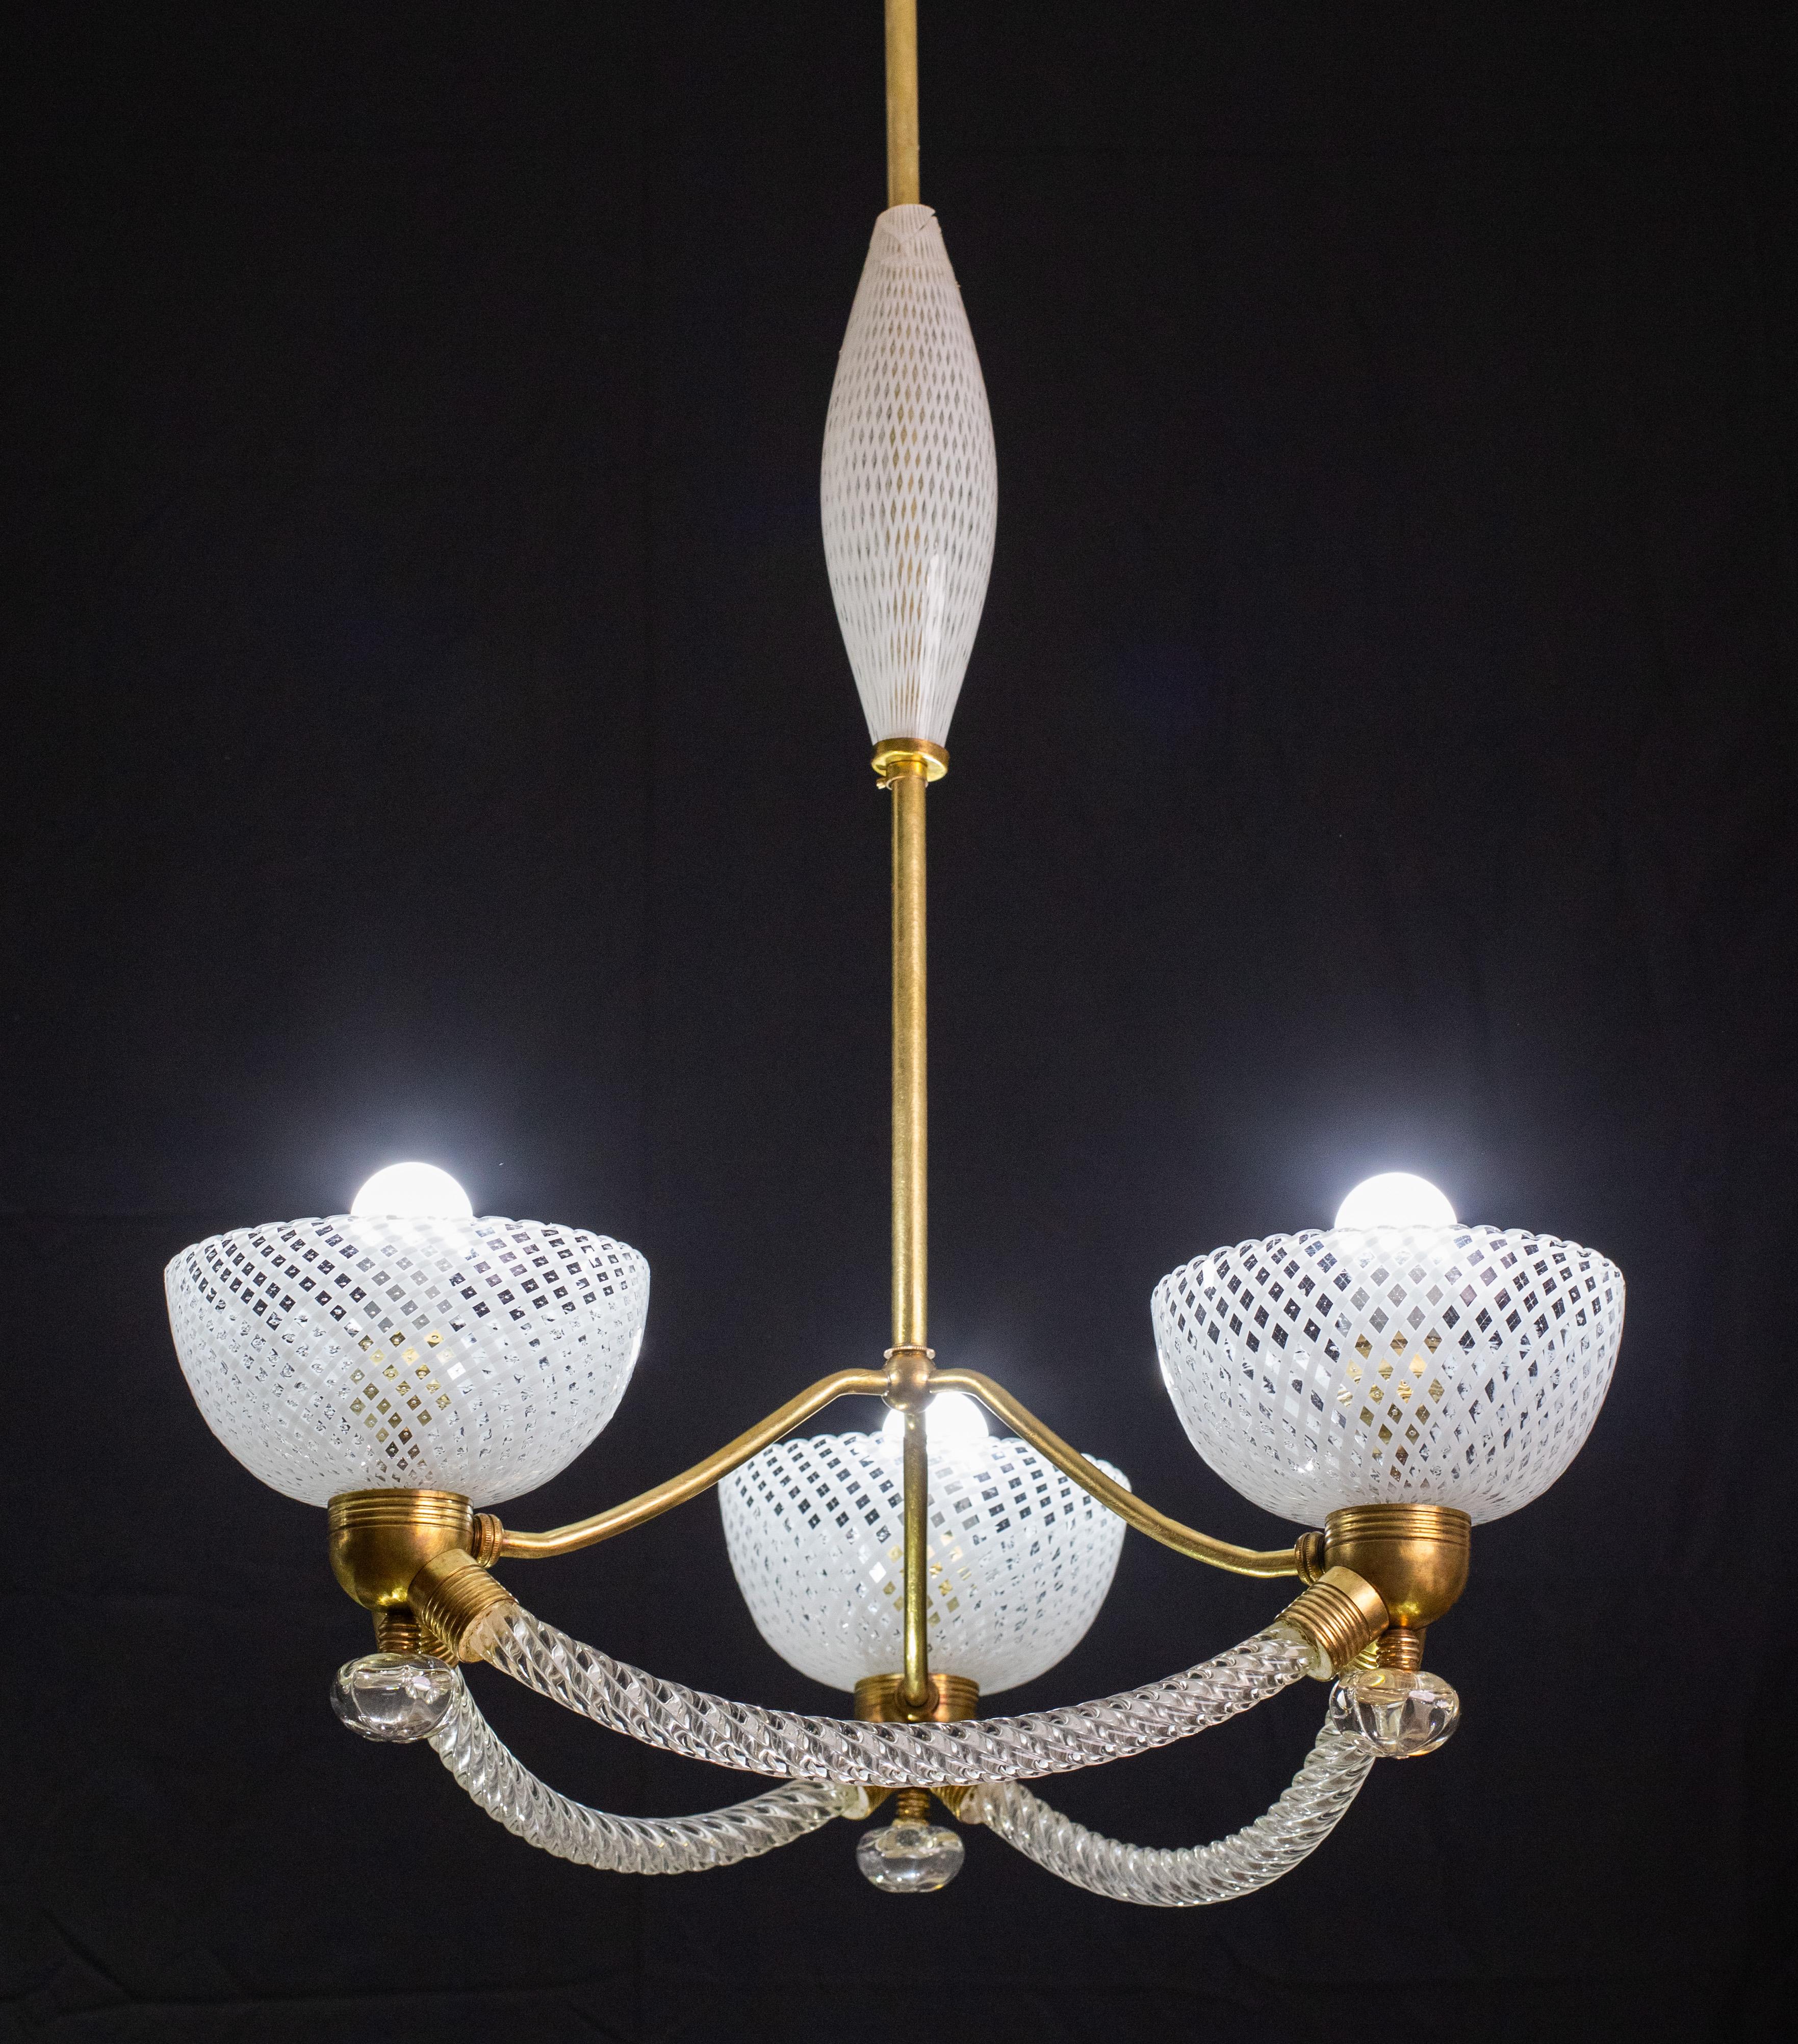 Extraordinary chandelier from the Venini glassworks, finished with 4 cups plus the central trunk in precious 